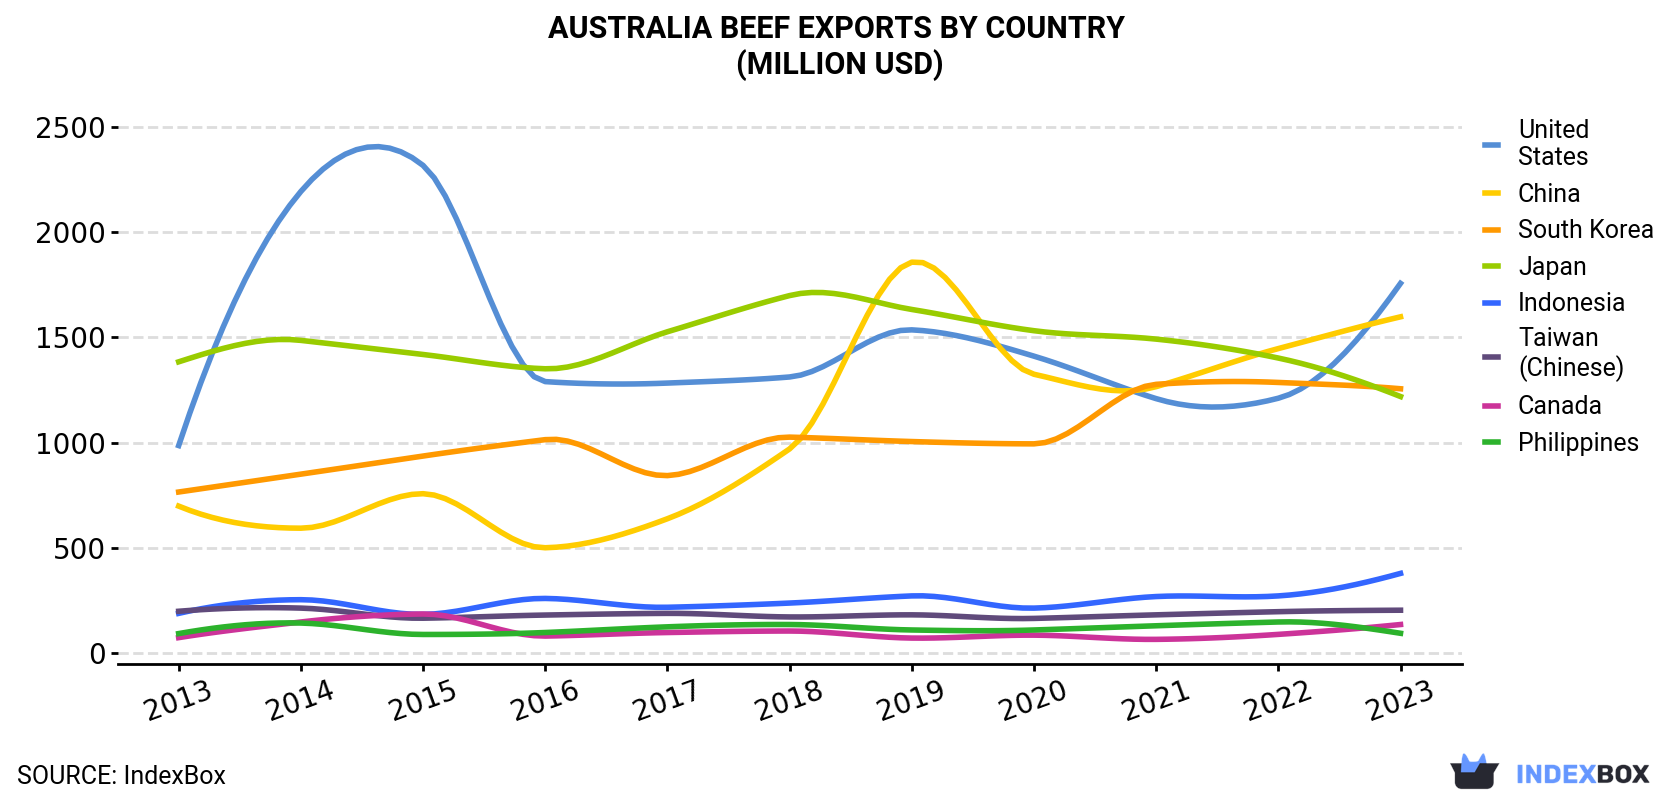 Australia Beef Exports By Country (Million USD)